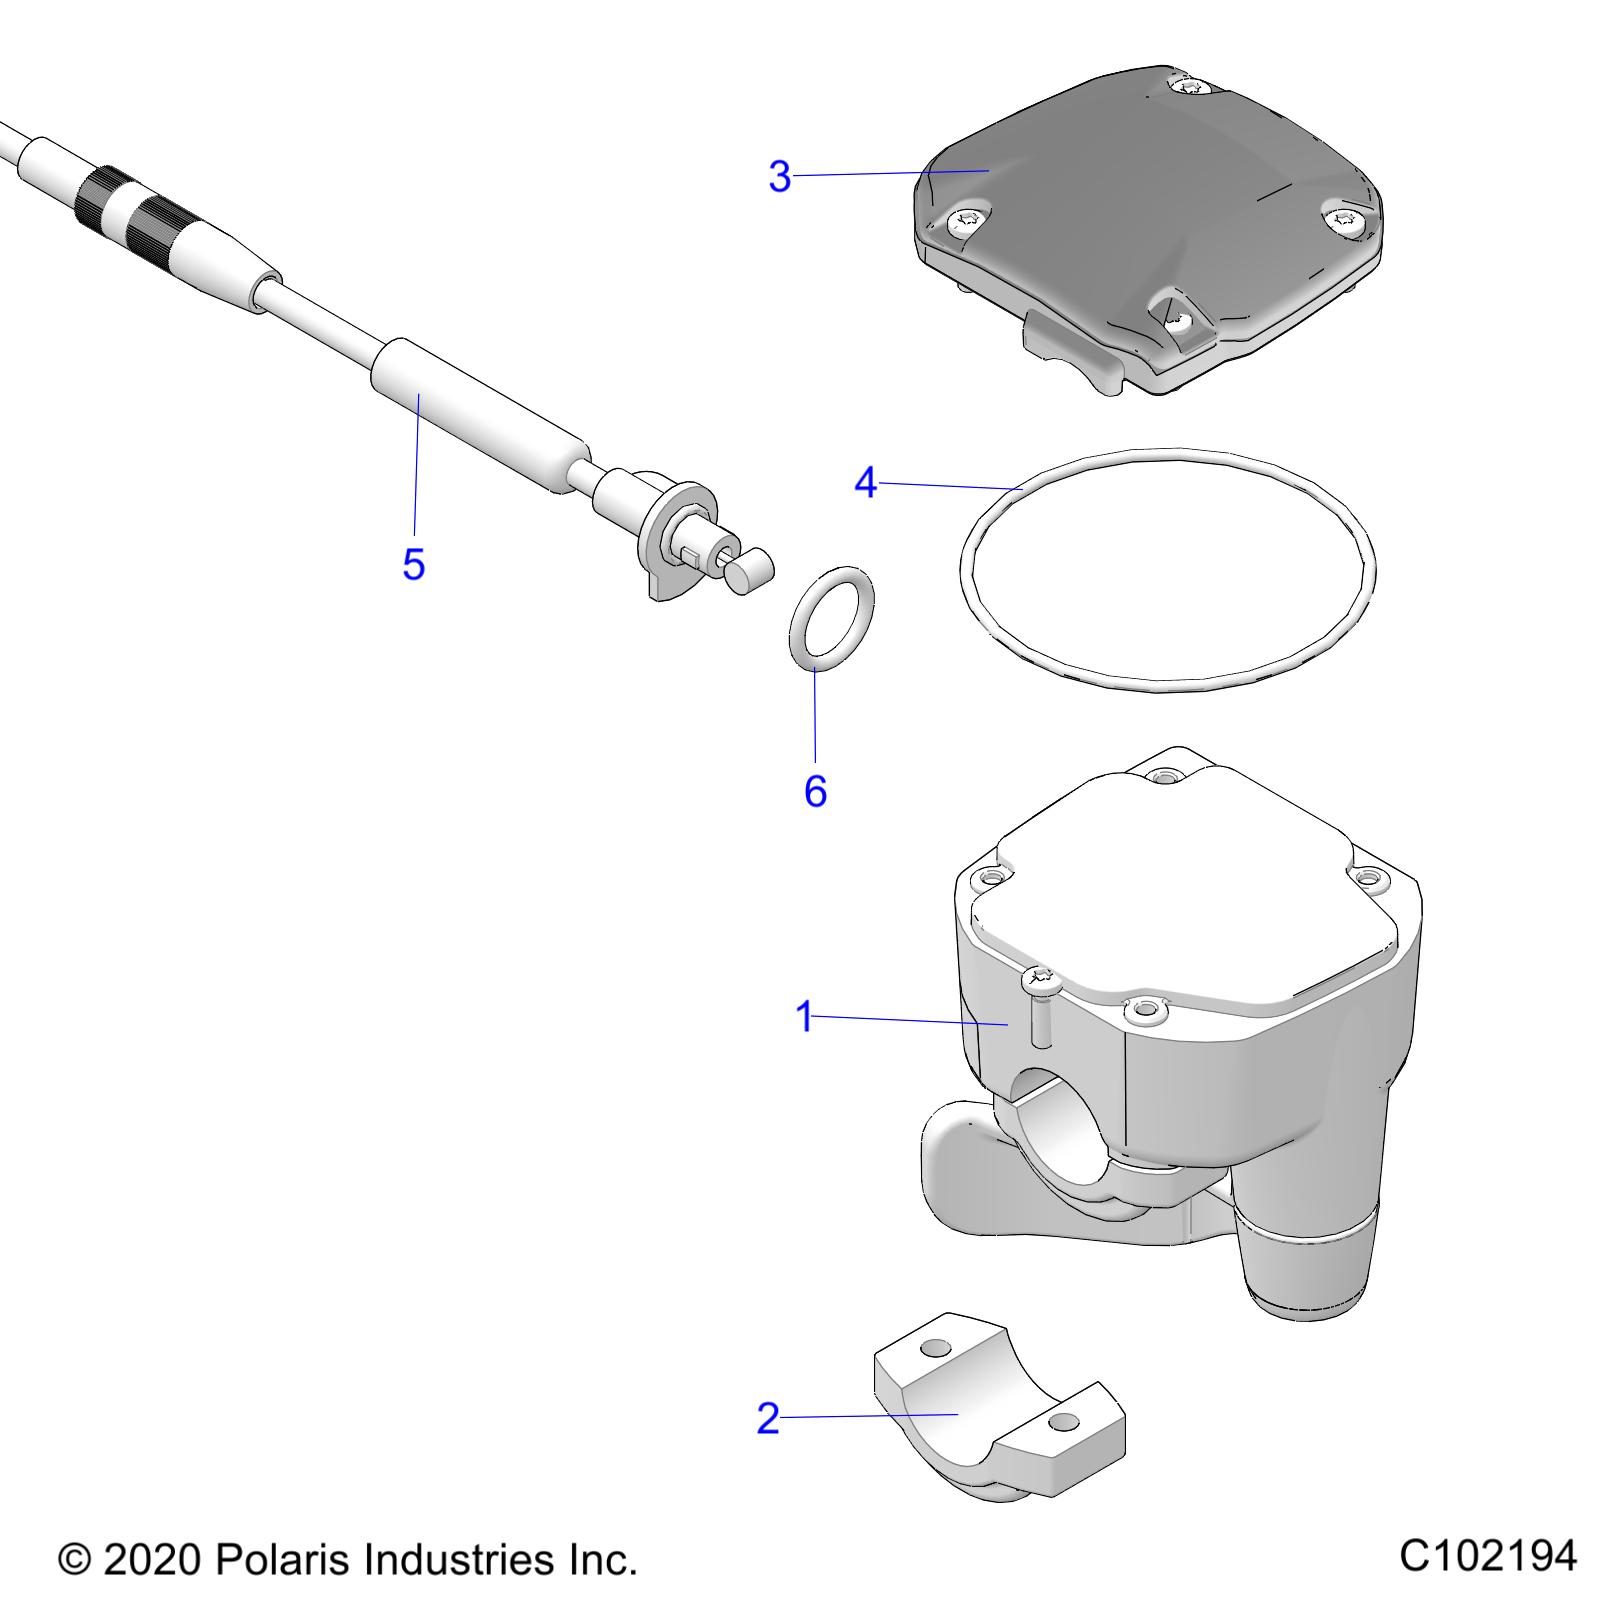 Part Number : 2010191 THROTTLE ASSEMBLY CLAMP